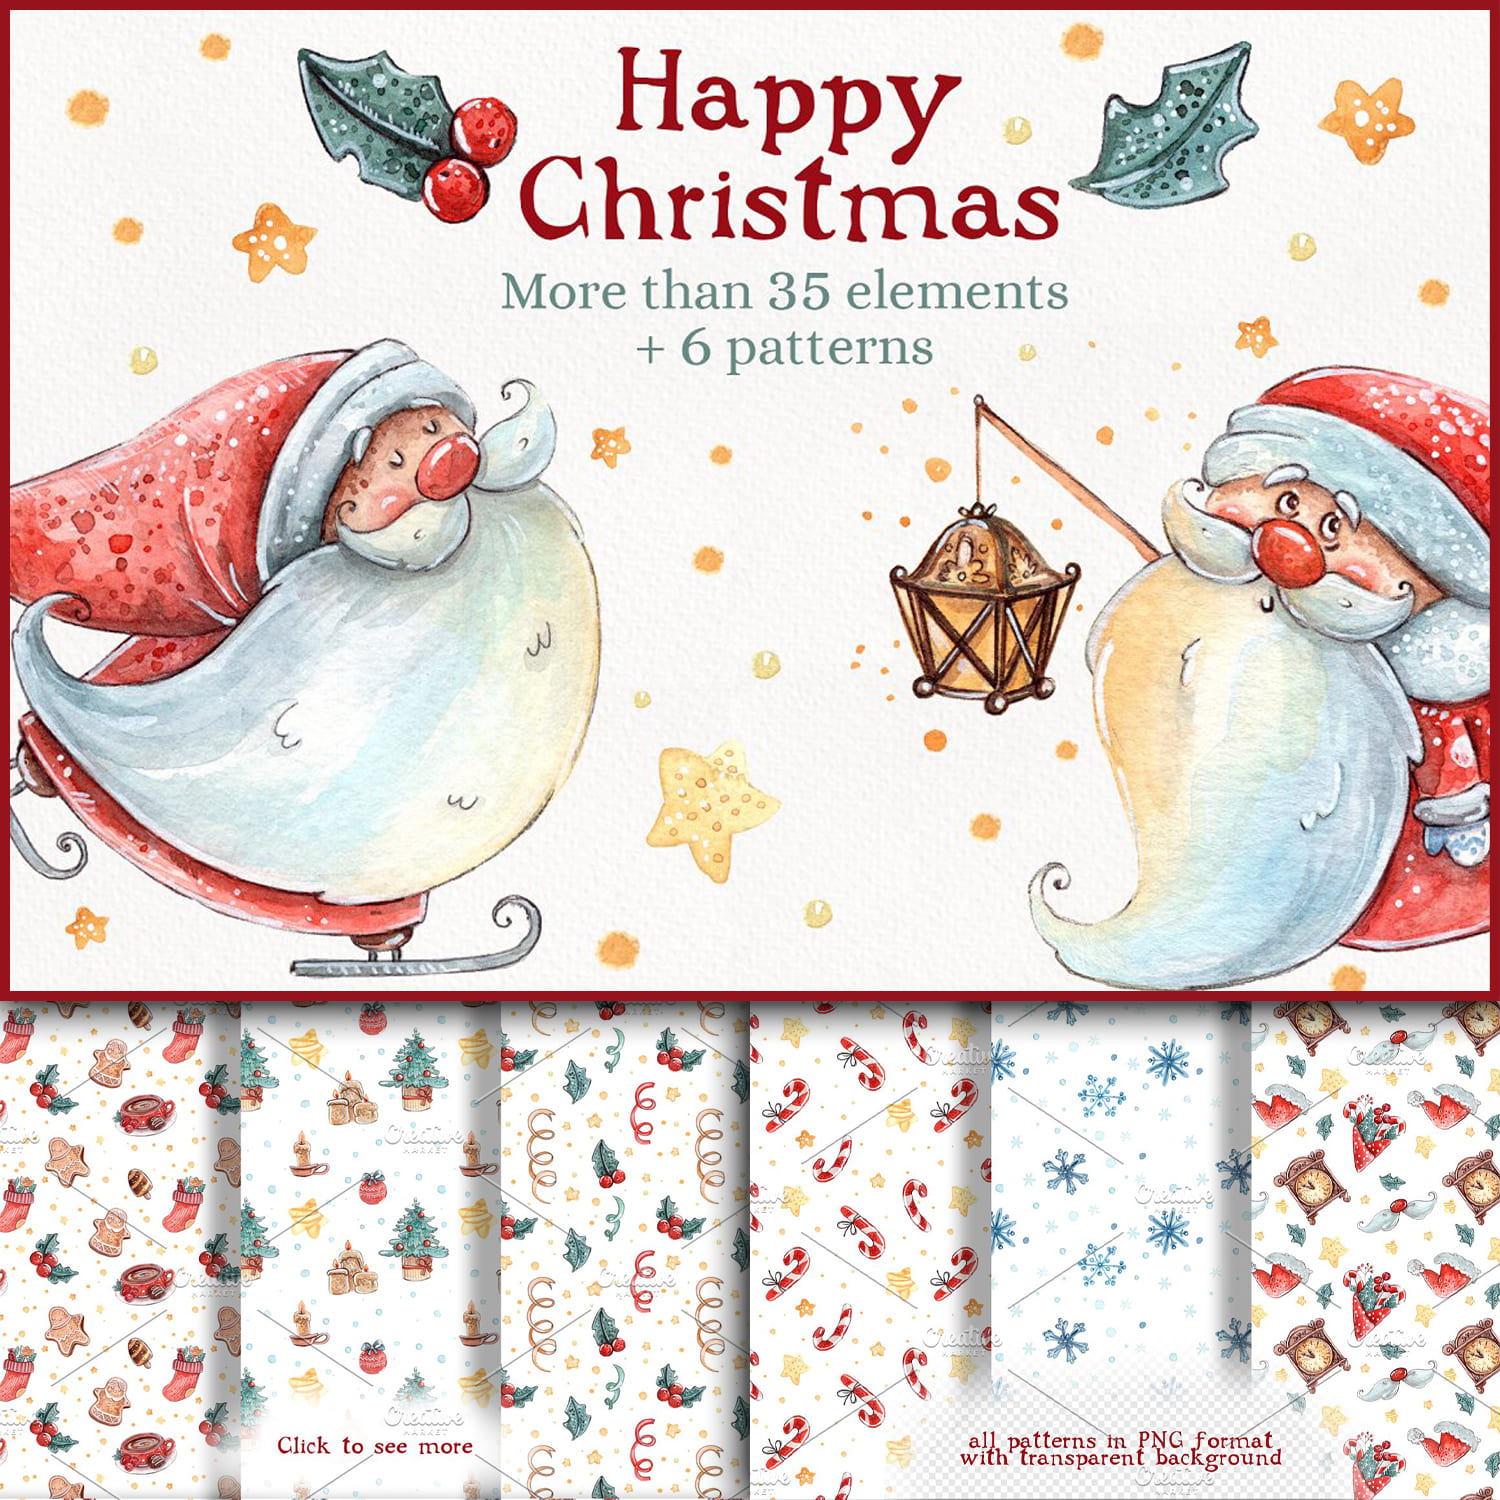 Preview happy christmas set 6 patterns.